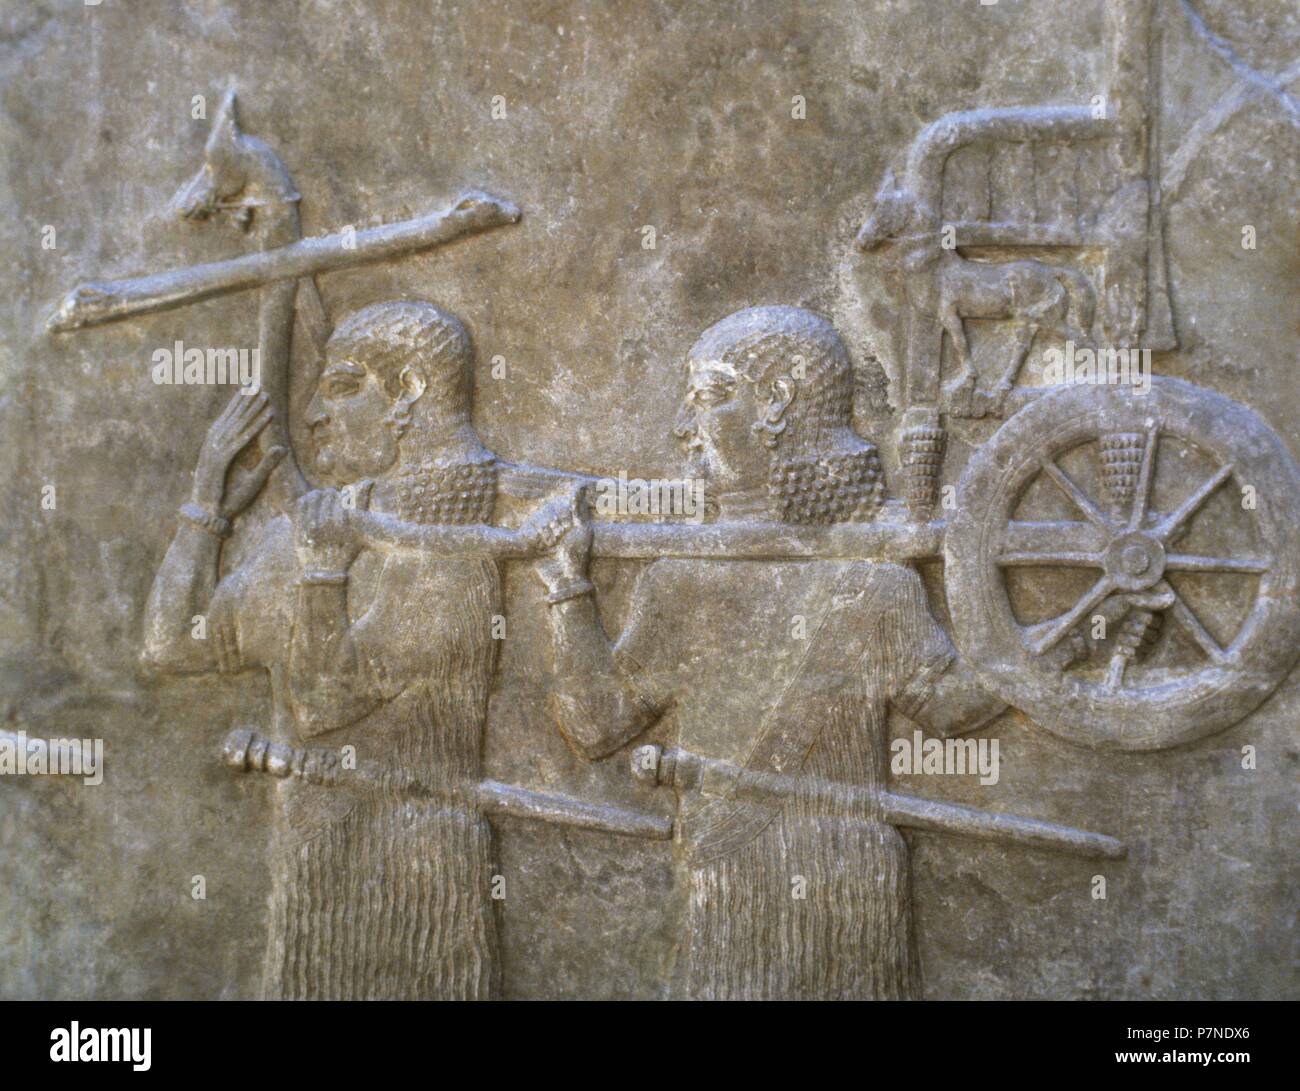 Servants transporting Sargon's chariot. 8th century BC. Relief. Palace of Sargon II of Assyria. Khorsabad, Iraq. Louvre Museum. Paris, France. Stock Photo